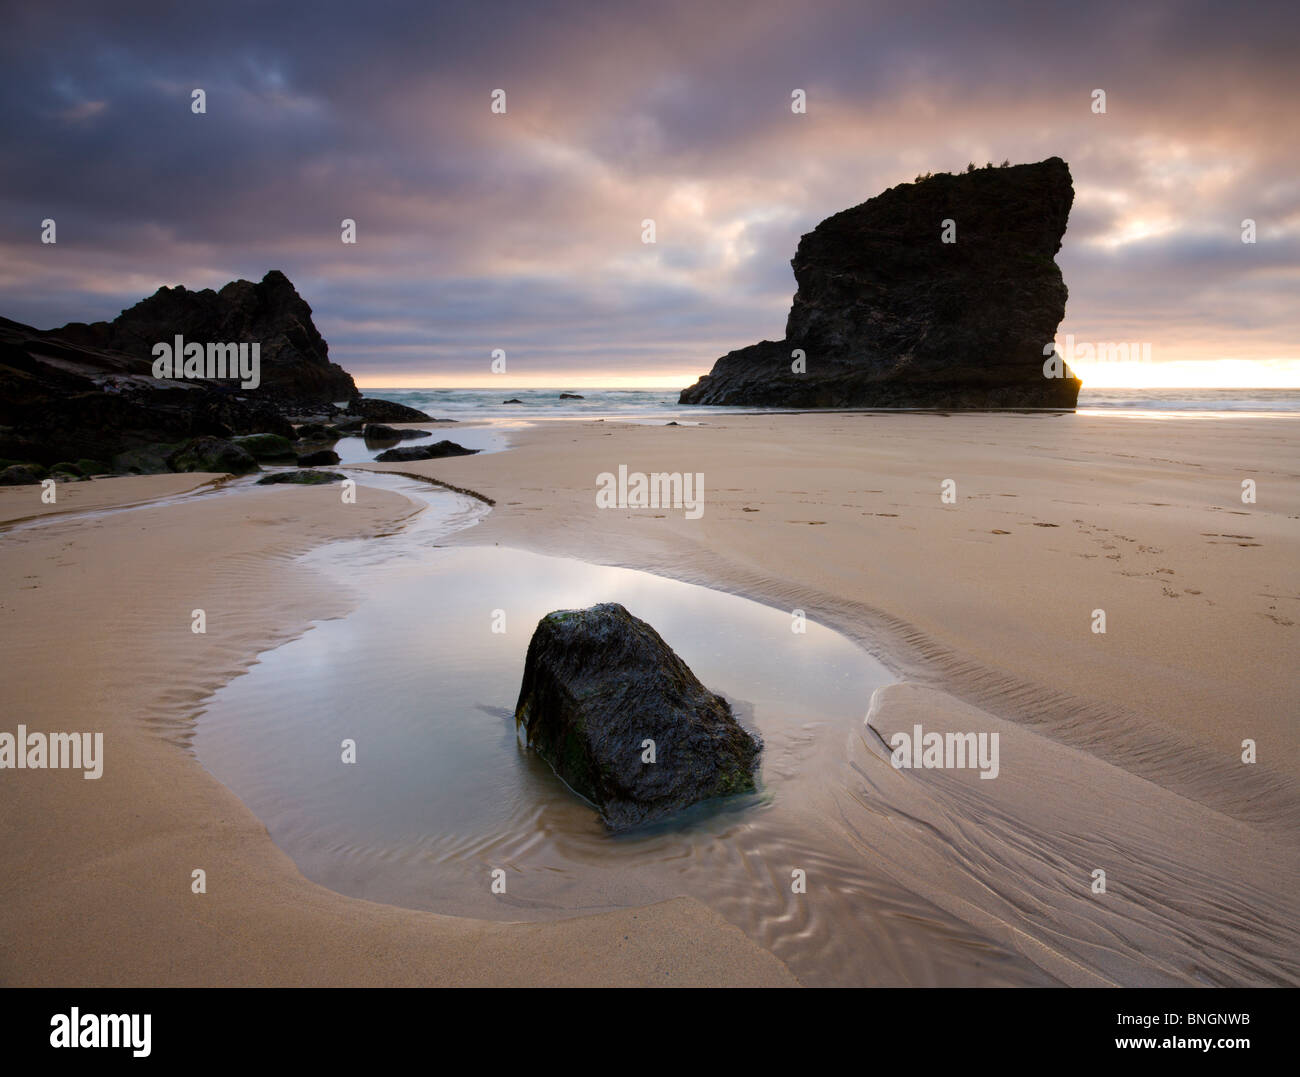 Rockpool and seastack on the sandy beach of Bedruthan Steps at sunset, Cornwall, England. Spring (May) 2009 Stock Photo